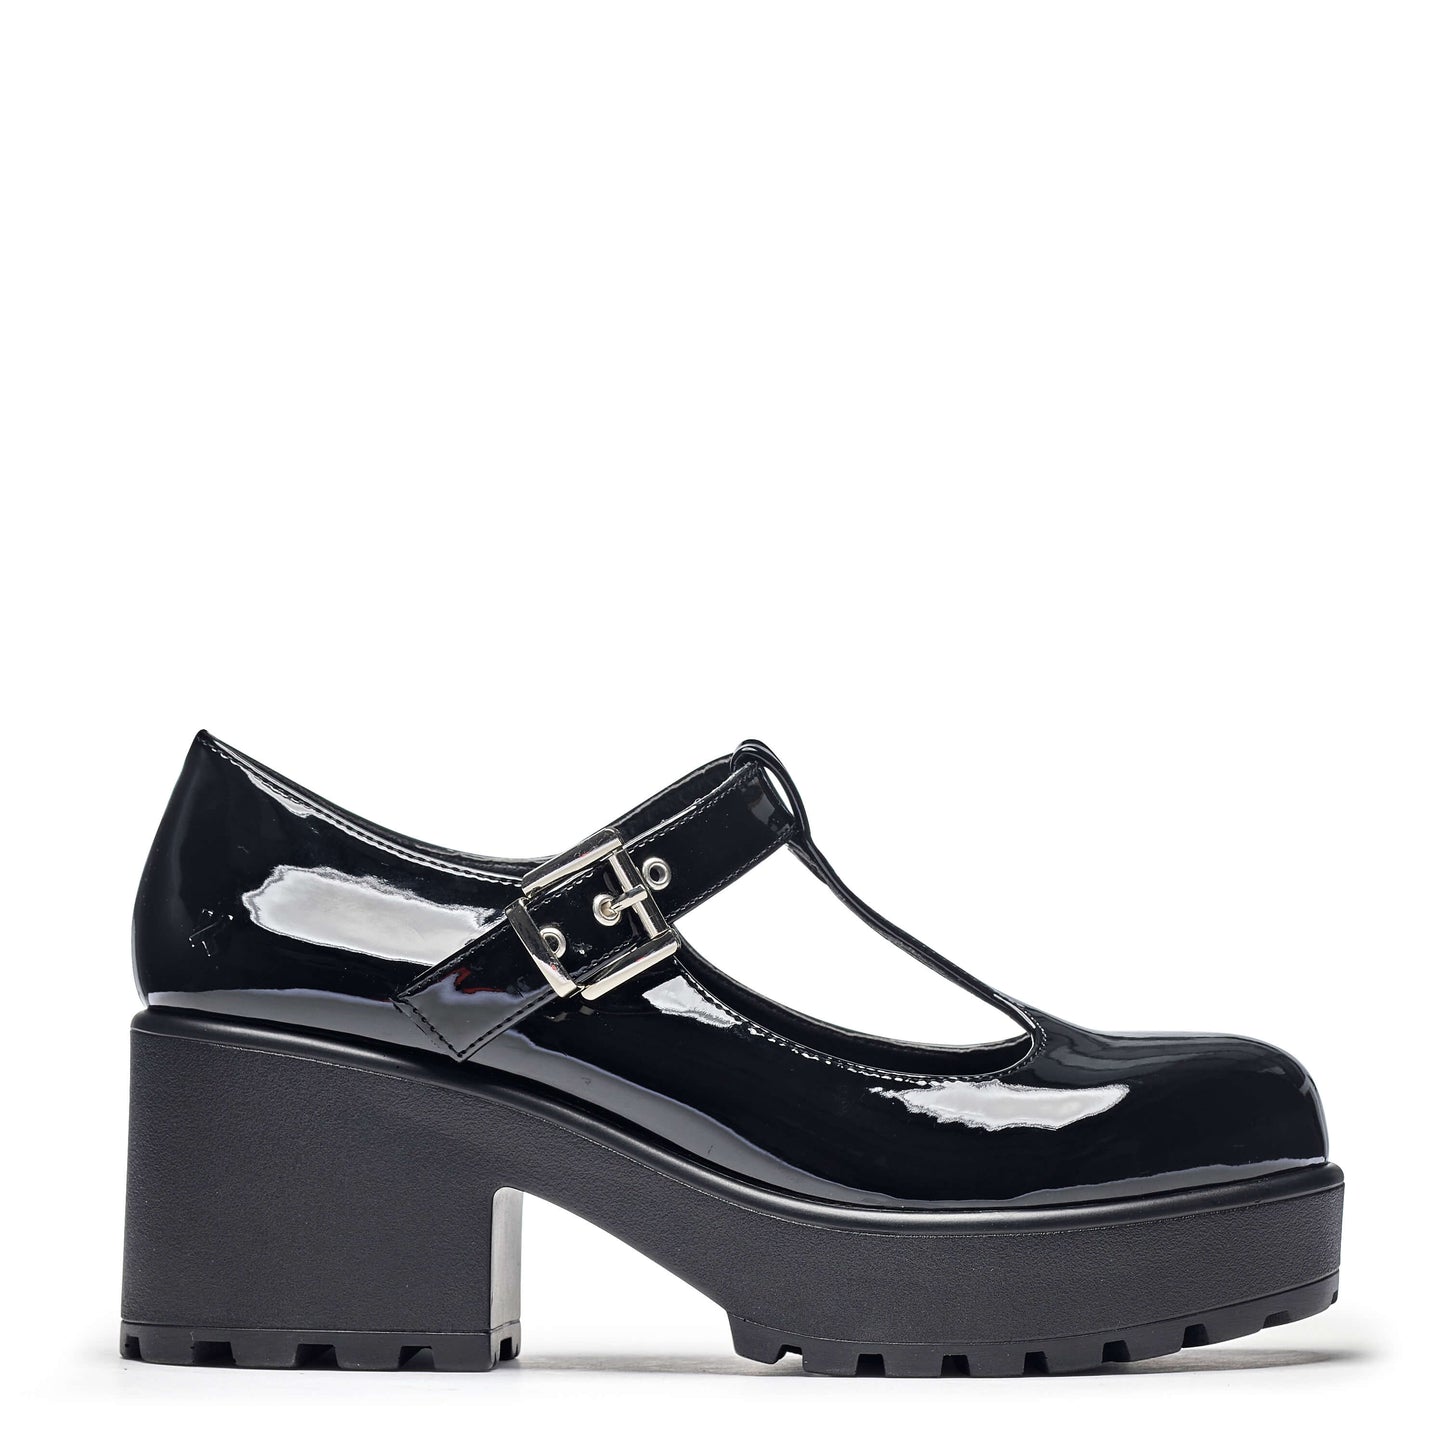 SAI Black Mary Jane Shoes 'Patent Edition' - Mary Janes - KOI Footwear - Black - Side View